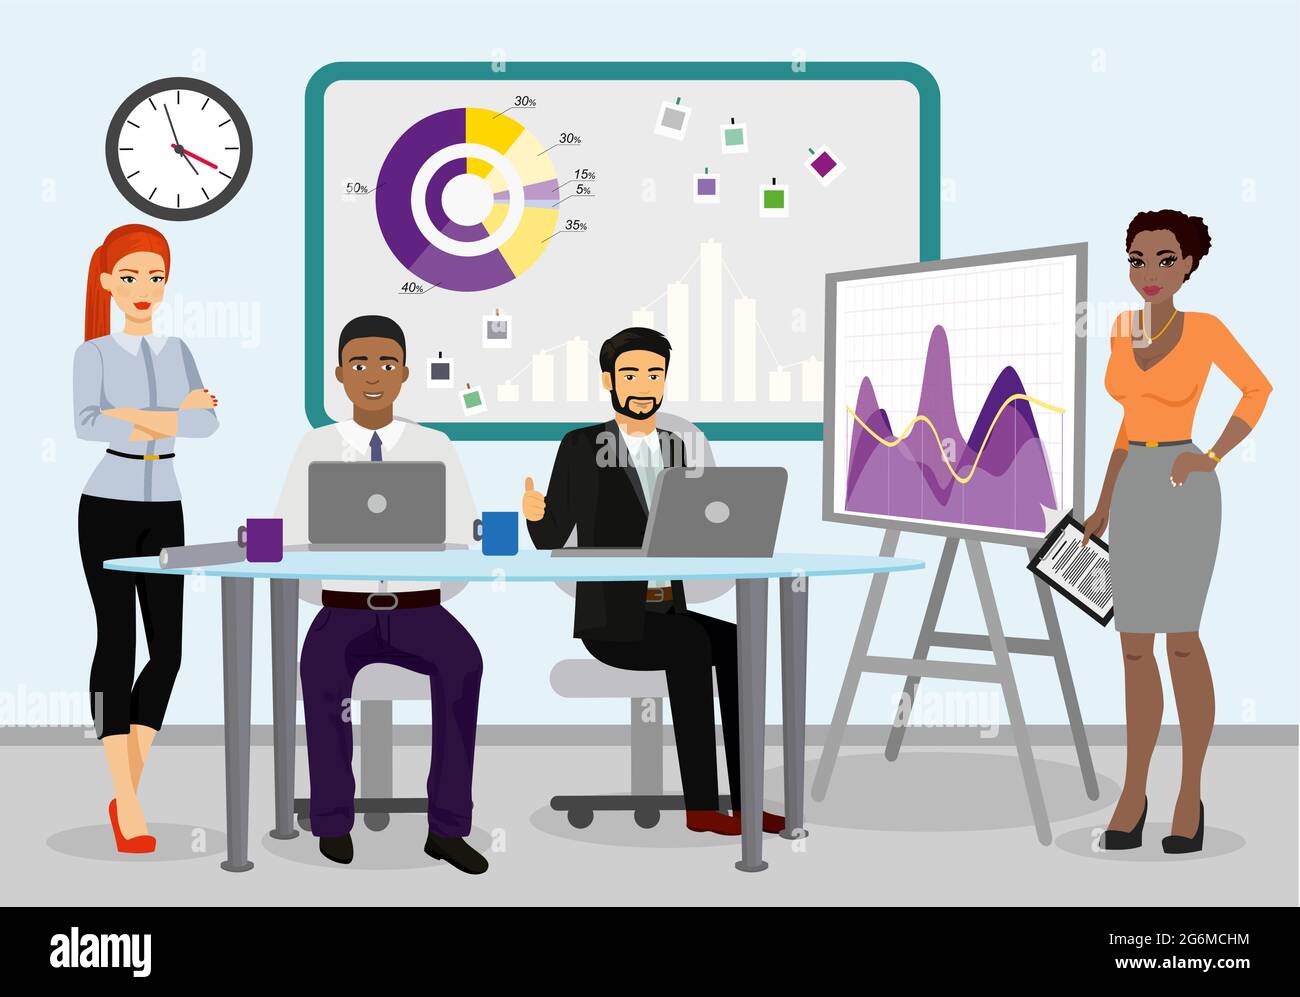 Vector illustration of business team managers working together. businessman leading the presentation during the meeting in office vector illustration. Stock Vector